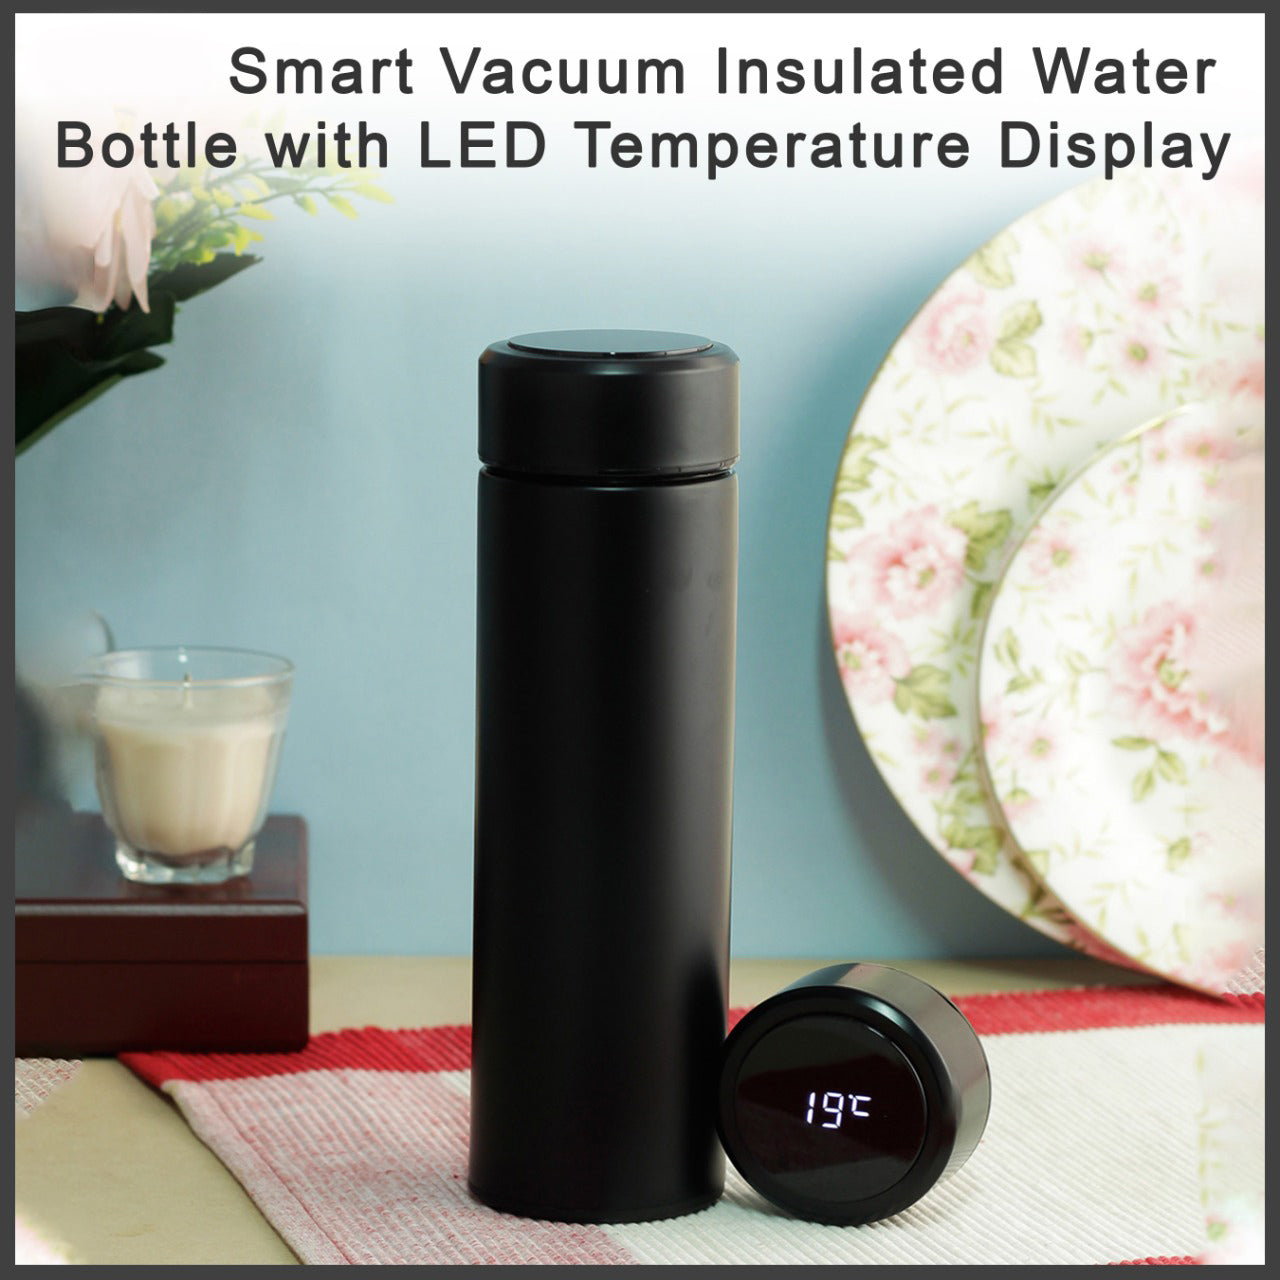 0726B SMART VACUUM INSULATED WATER BOTTLE WITH LED TEMPERATURE DISPLAY DeoDap